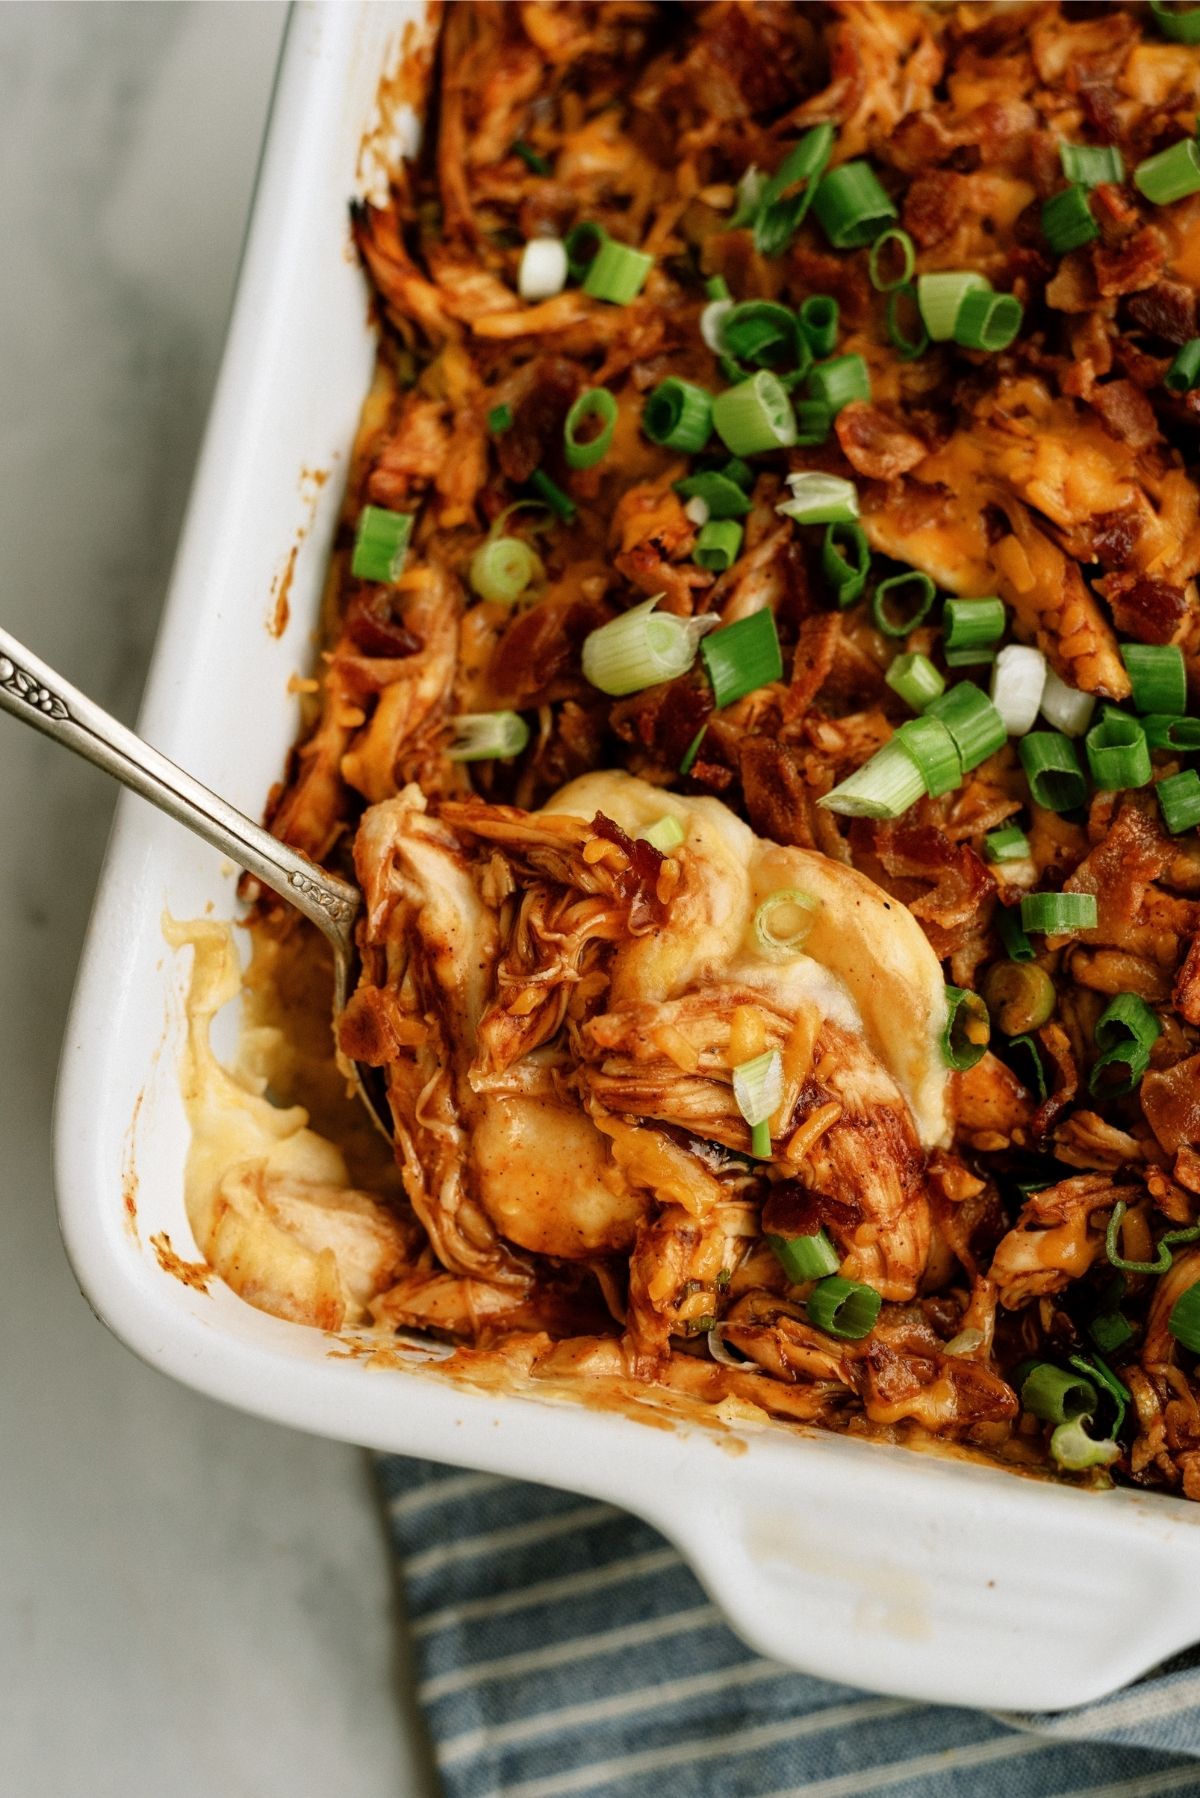 BBQ Chicken and Potato Casserole in a casserole dish with a serving spoon